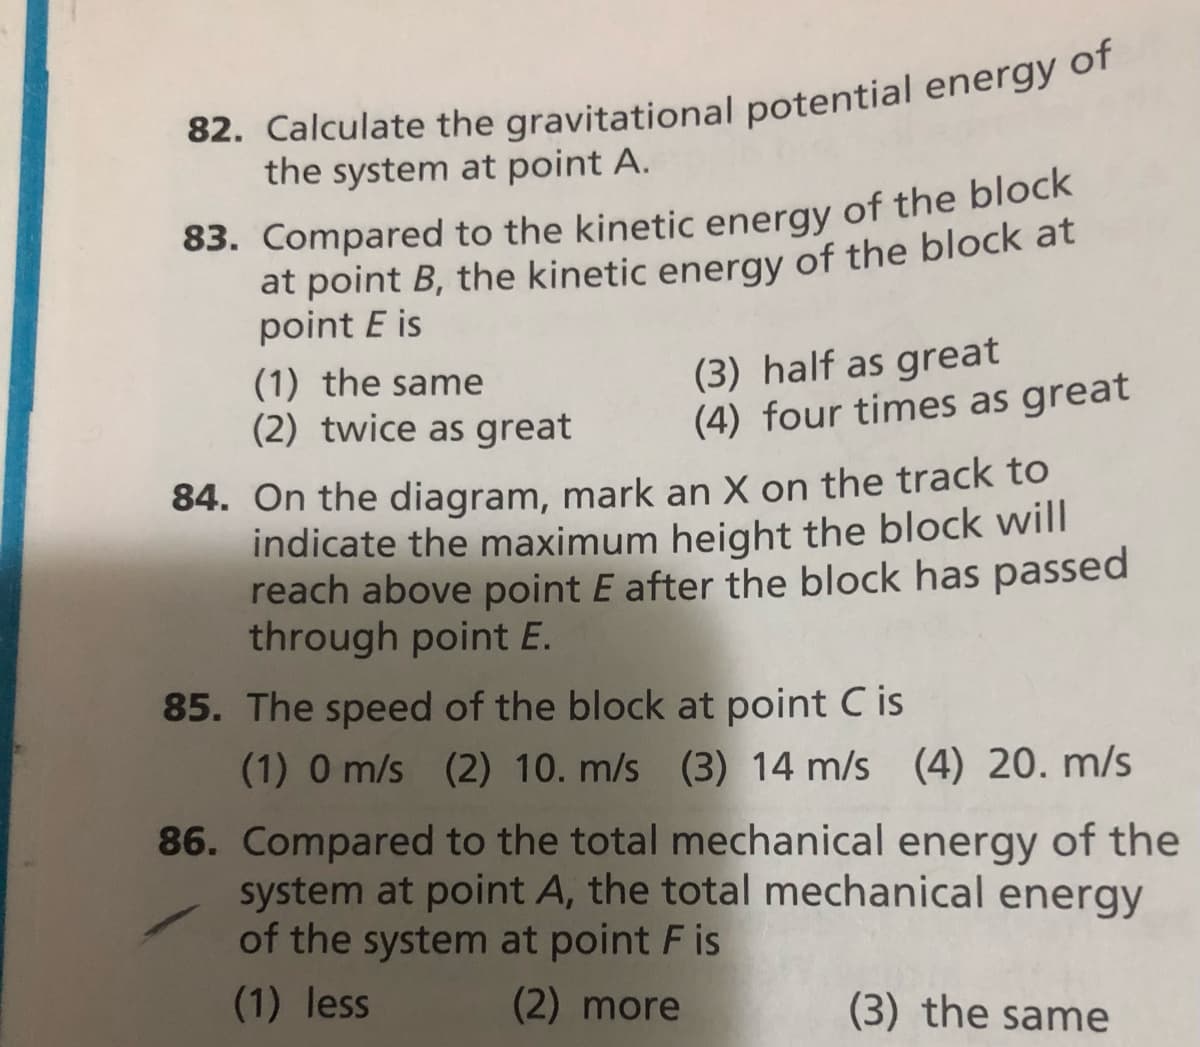 82. Calculate the gravitational potential energy of
the system at point A.
83. Compared to the kinetic energy of the block
at point B, the kinetic energy of the block at
point E is
(1) the same
(2) twice as great
(3) half as great
(4) four times as great
84. On the diagram, mark an X on the track to
indicate the maximum height the block will
reach above point E after the block has passed
through point E.
85. The speed of the block at point C is
(1) 0 m/s (2) 10. m/s (3) 14 m/s (4) 20. m/s
86. Compared to the total mechanical energy of the
system at point A, the total mechanical energy
of the system at point F is
(1) less
(2) more
(3) the same
